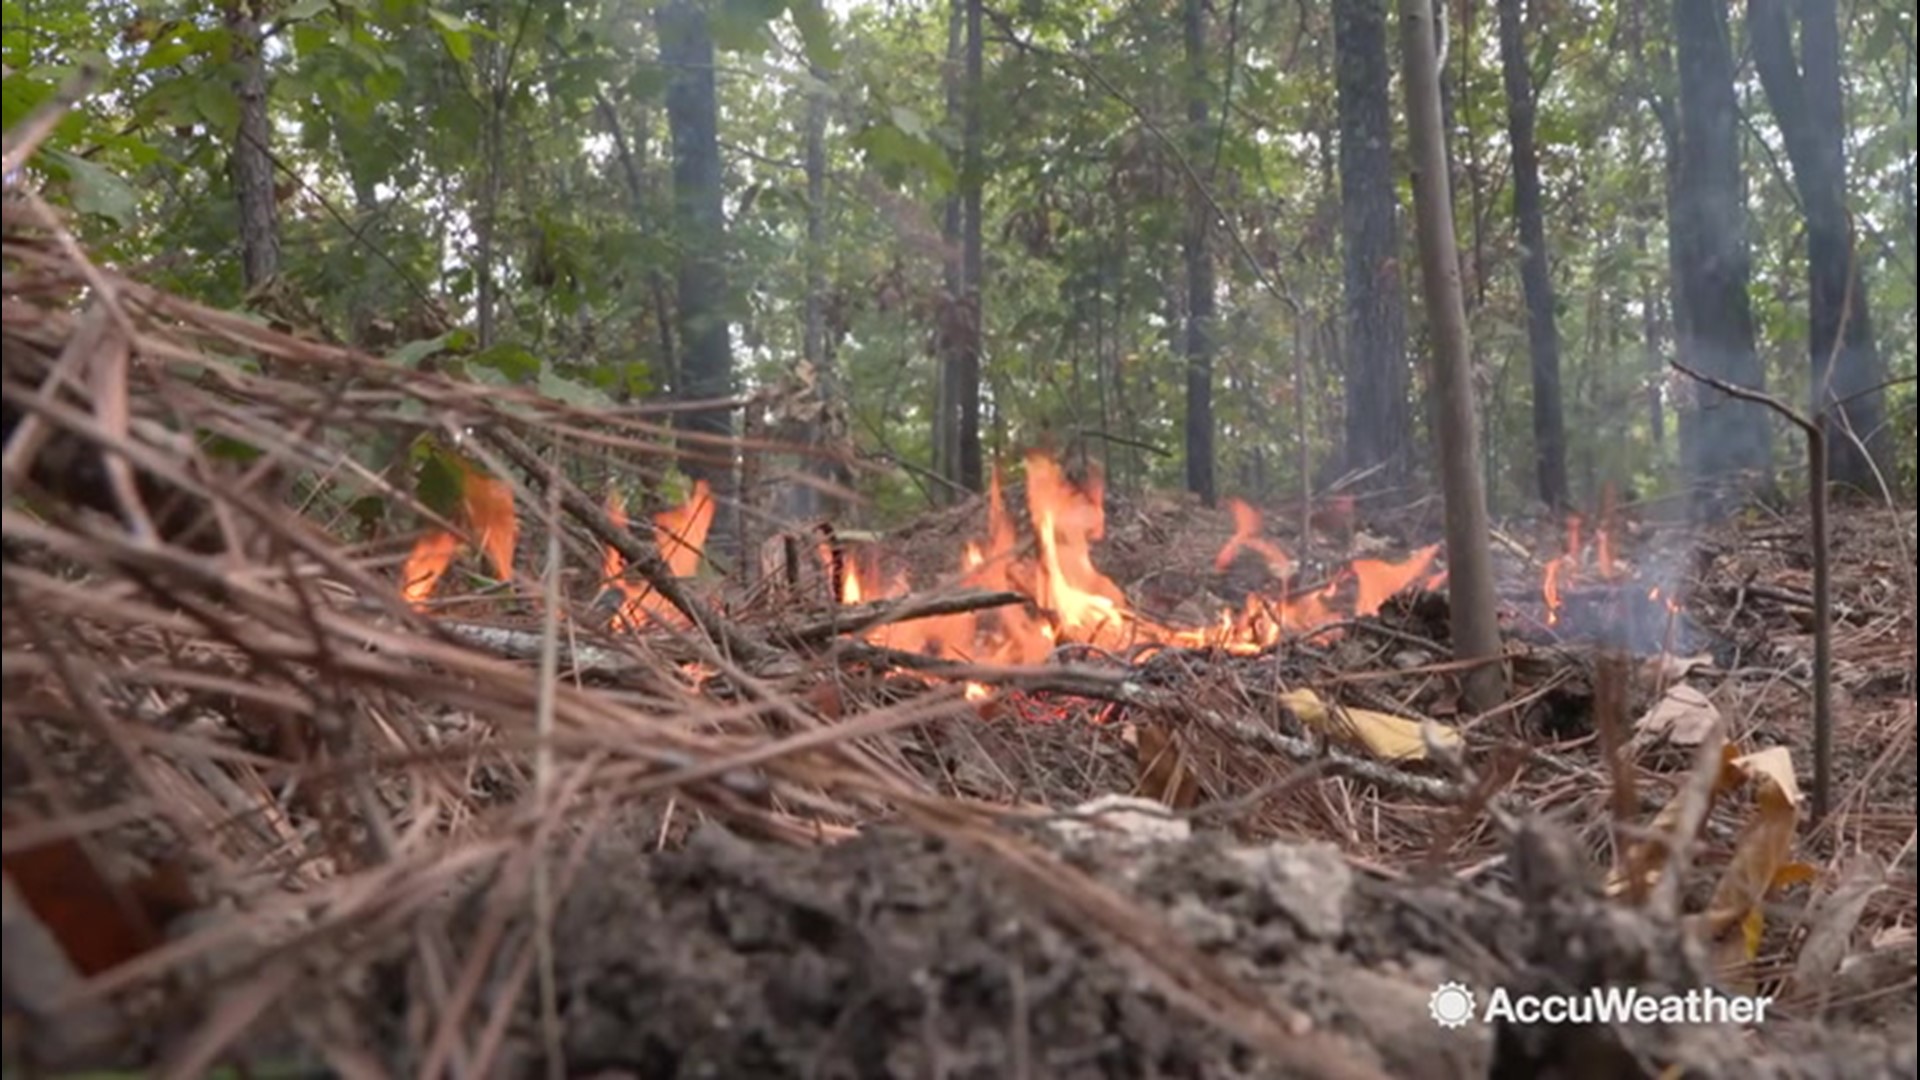 Northern Georgia have been experiencing severe droughts, which have elevated the risk of wildfires.  People were reminded to be careful with both campfires and debris burning. Currently all debris burning must be approved by the state forest service.